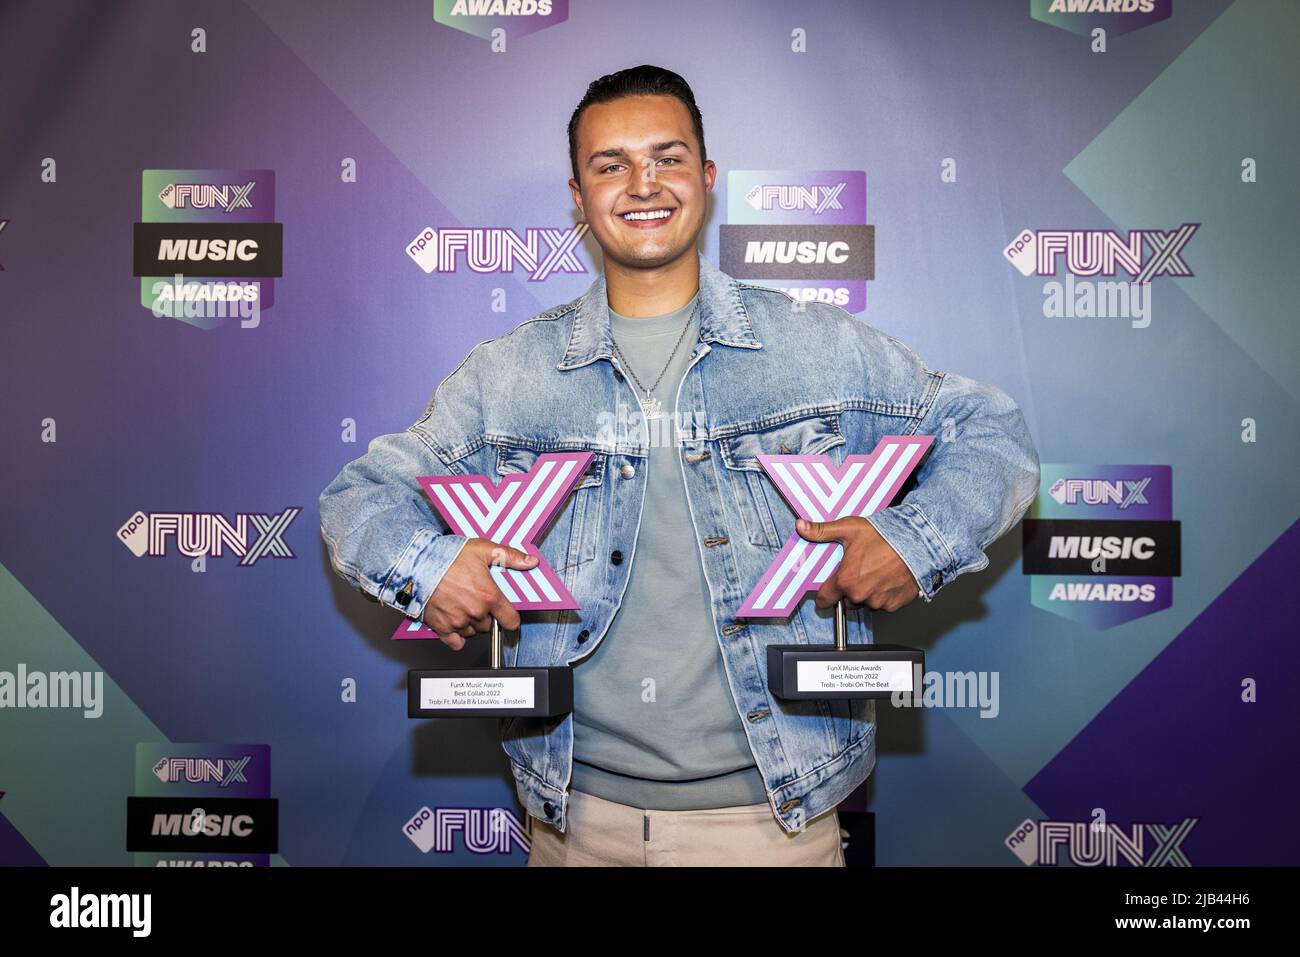 2022-06-02 23:01:27 AMSTERDAM - Trobi wins the best collab and best album award during the FunX Music Awards in AFAS Live in Amsterdam. During the award show, the most important music prizes of the young Netherlands were presented. ANP RAMON VAN FLYMEN netherlands out - belgium out Stock Photo